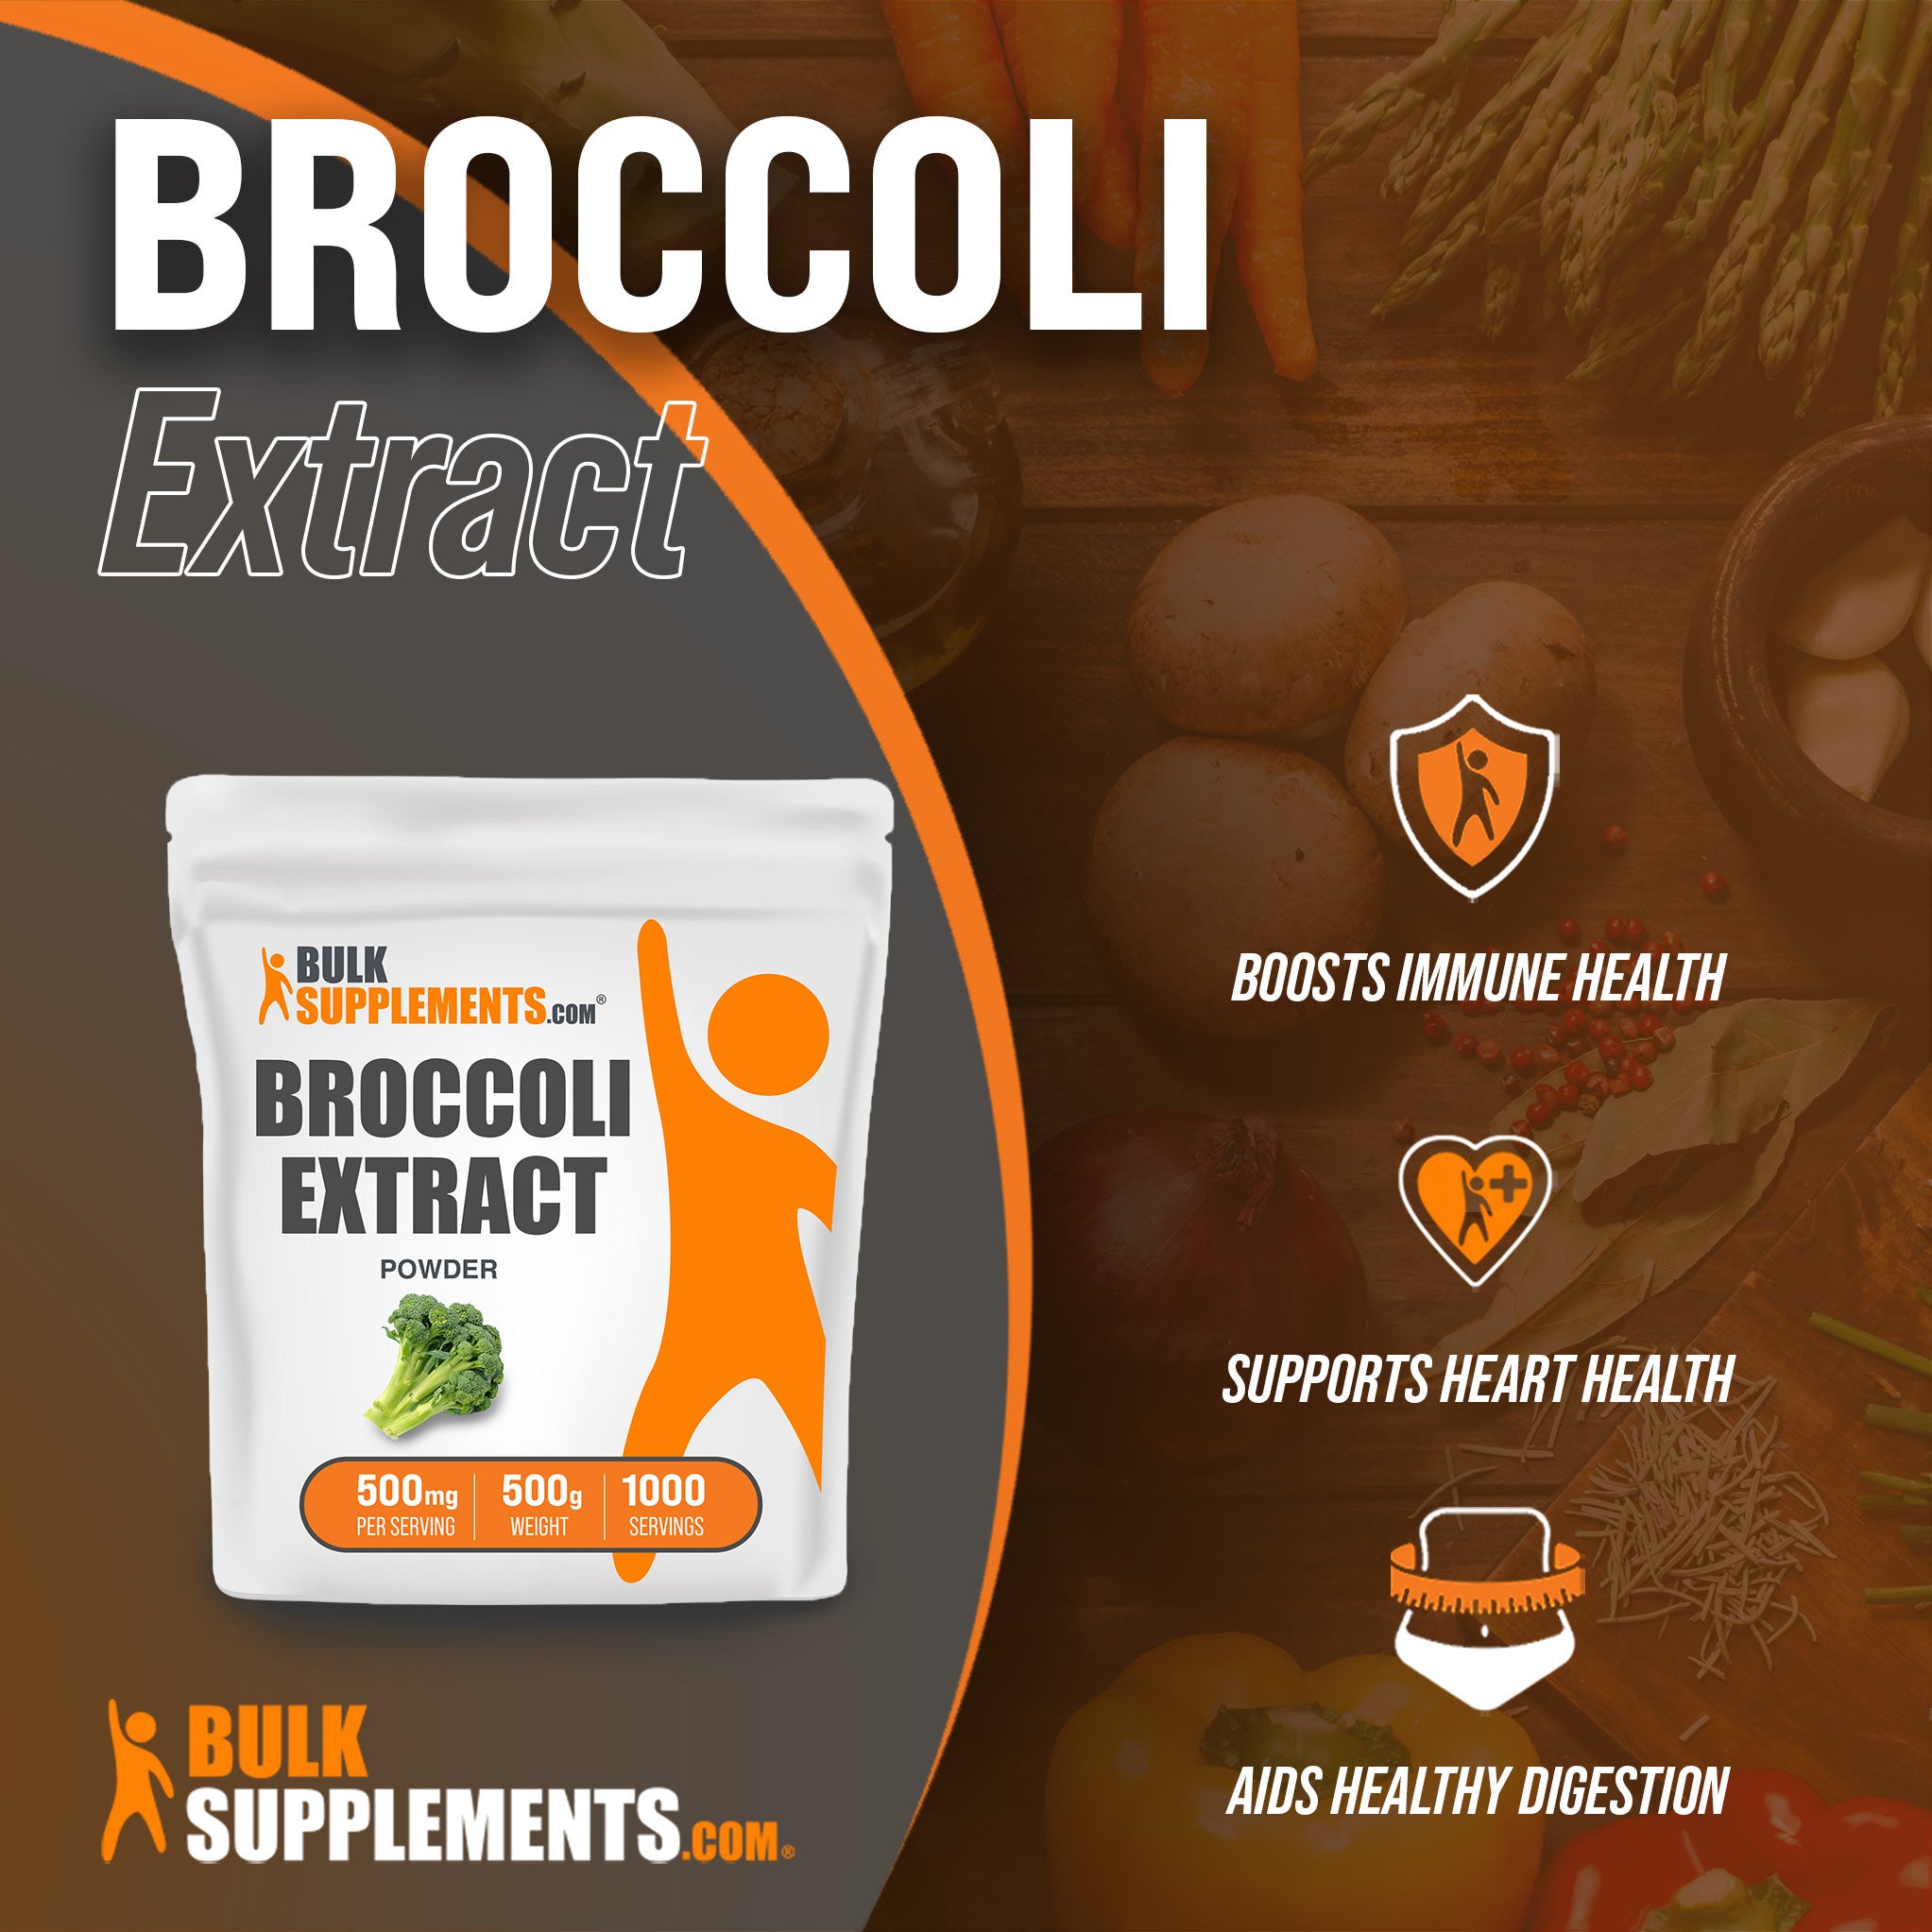 Benefits of Broccoli Extract; boosts immune health, supports heart health, aids healthy digestion